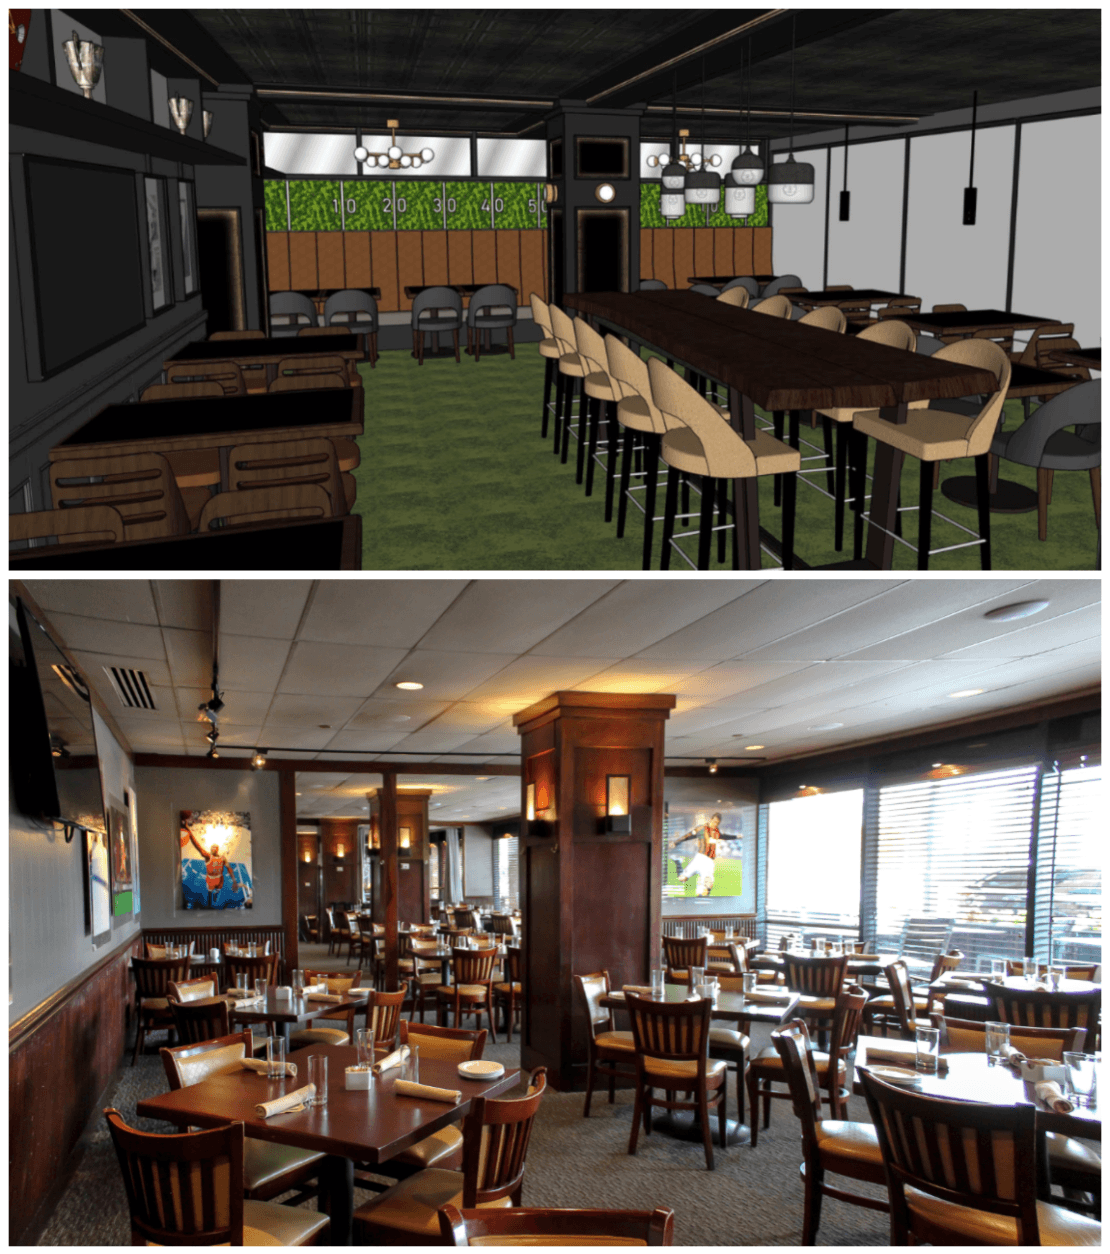 Joe Theismann’s Restaurant in Old Town Alexandria is getting a renovation. Above are top-to-bottom comparisons of the new look (top, rendering) and the old look (bottom). (Courtesy Alexandria Restaurant Partners)